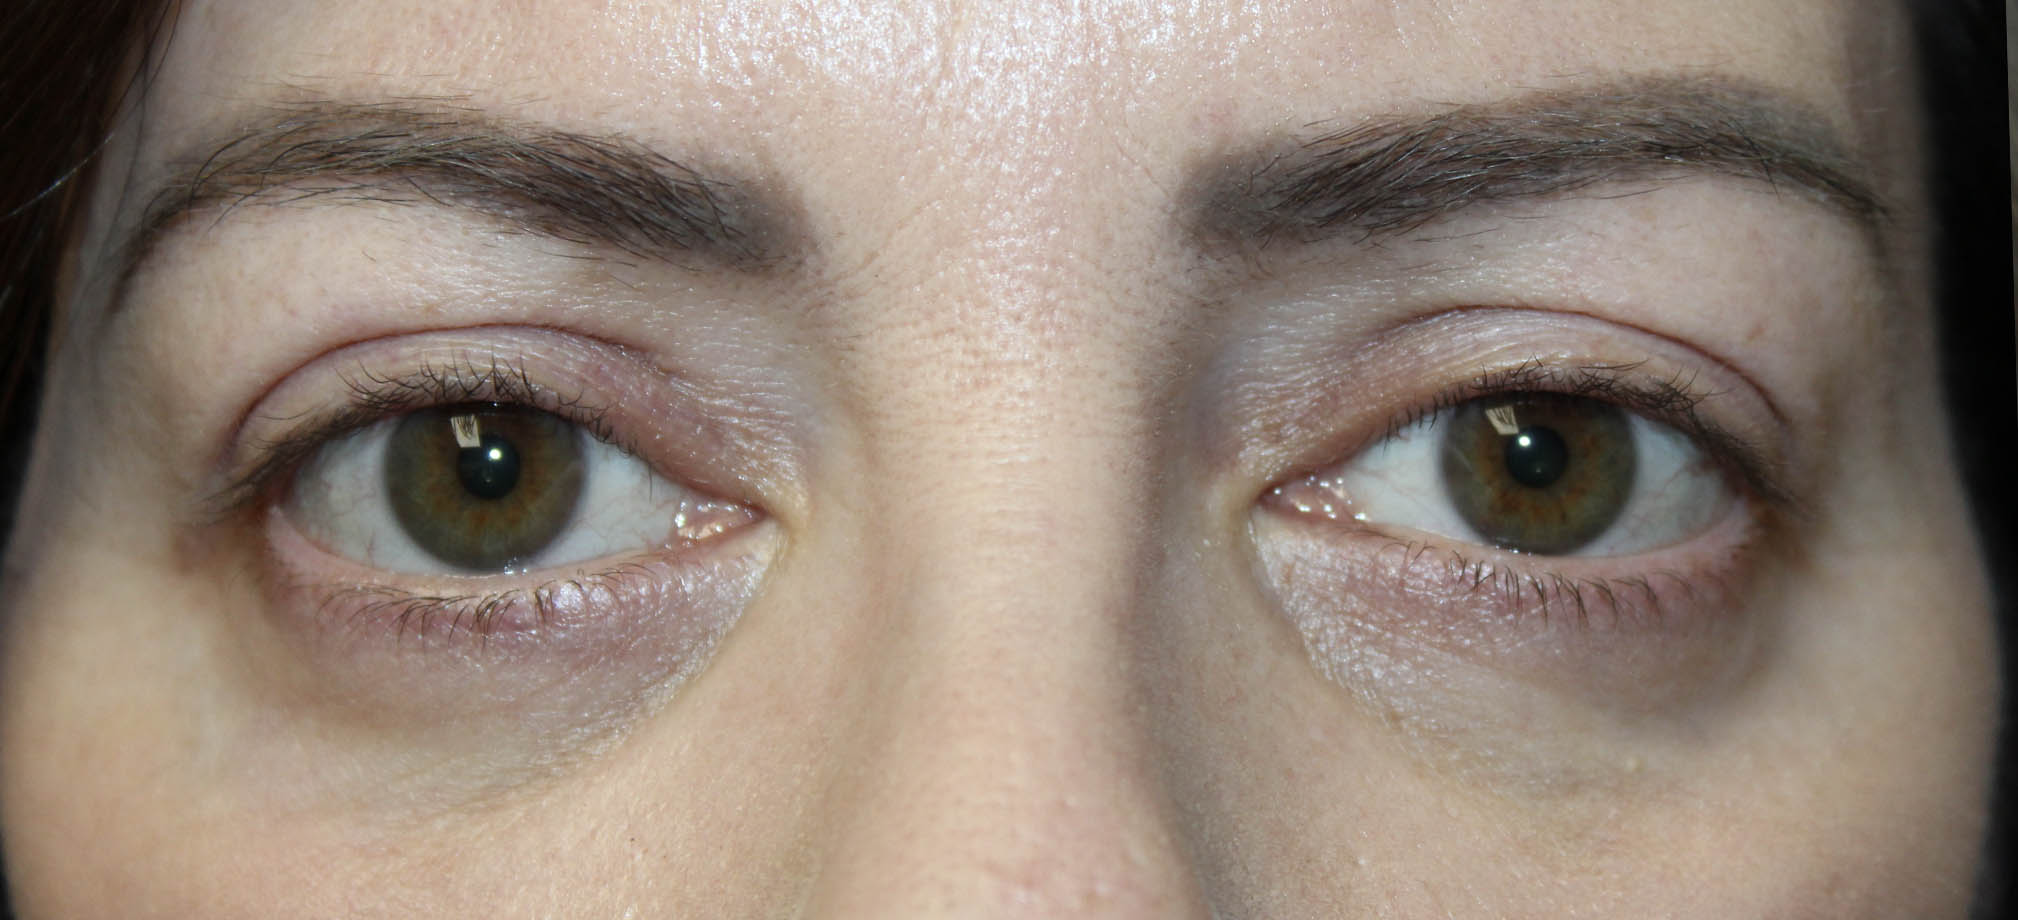 woman eyes open upper and lower blepharoplasty surgery results